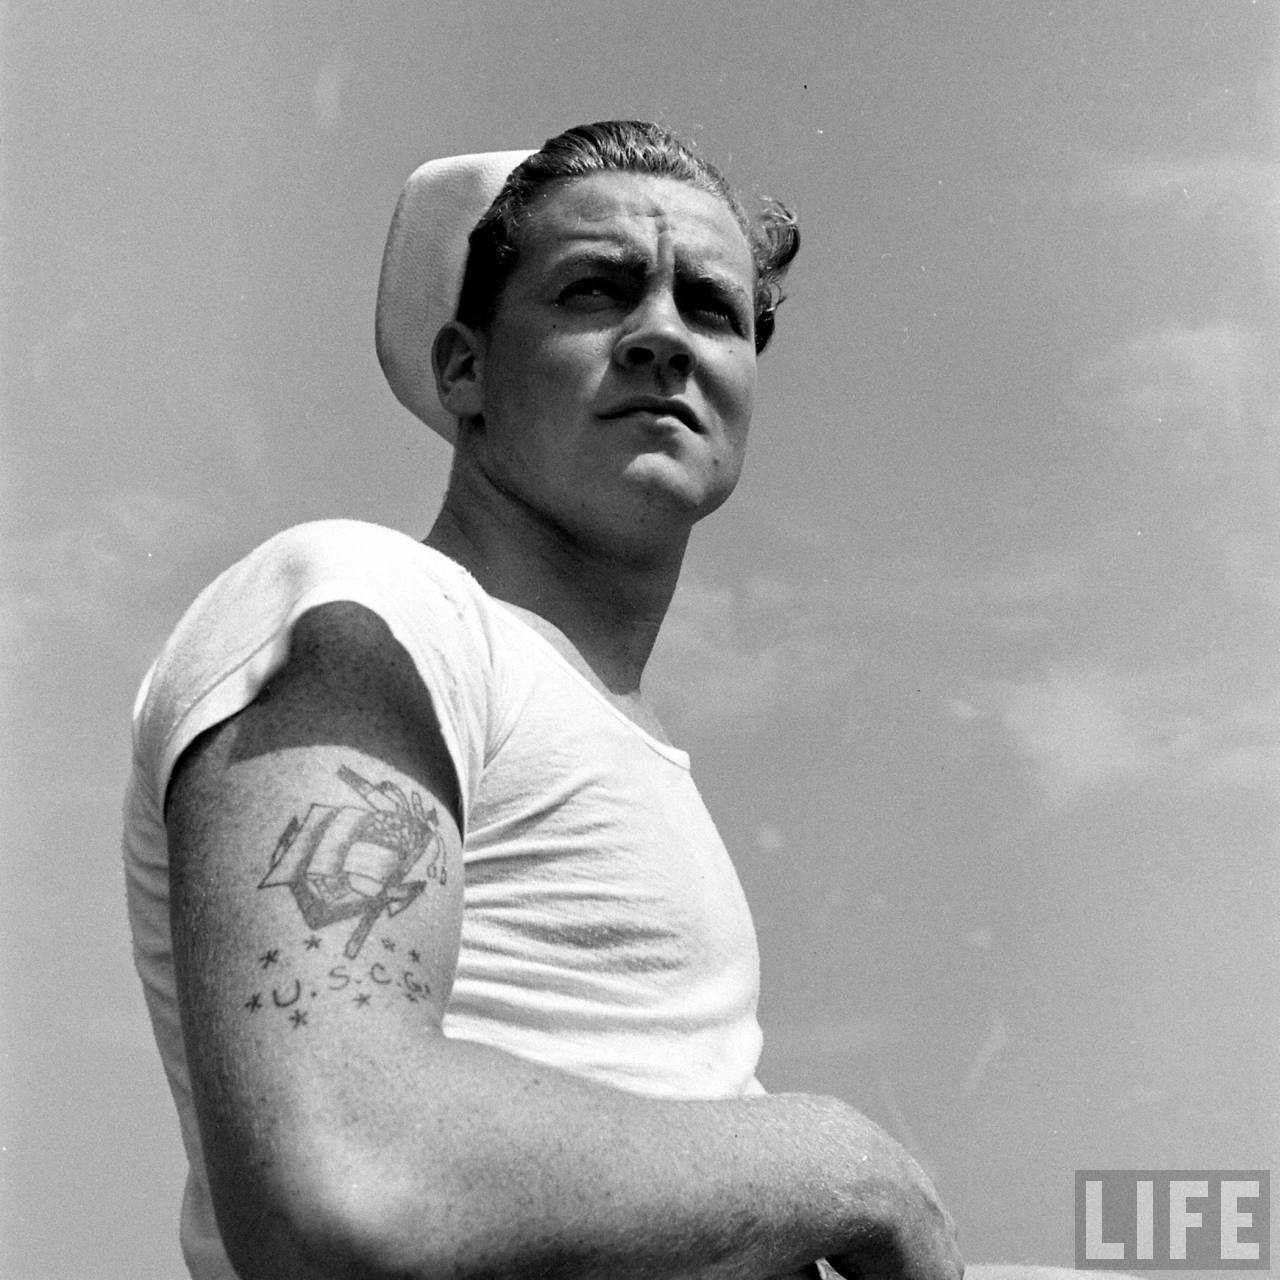 An iconic photo of a US Sailor in a white T-shirt. Photo credit and copyright LIFE magazine